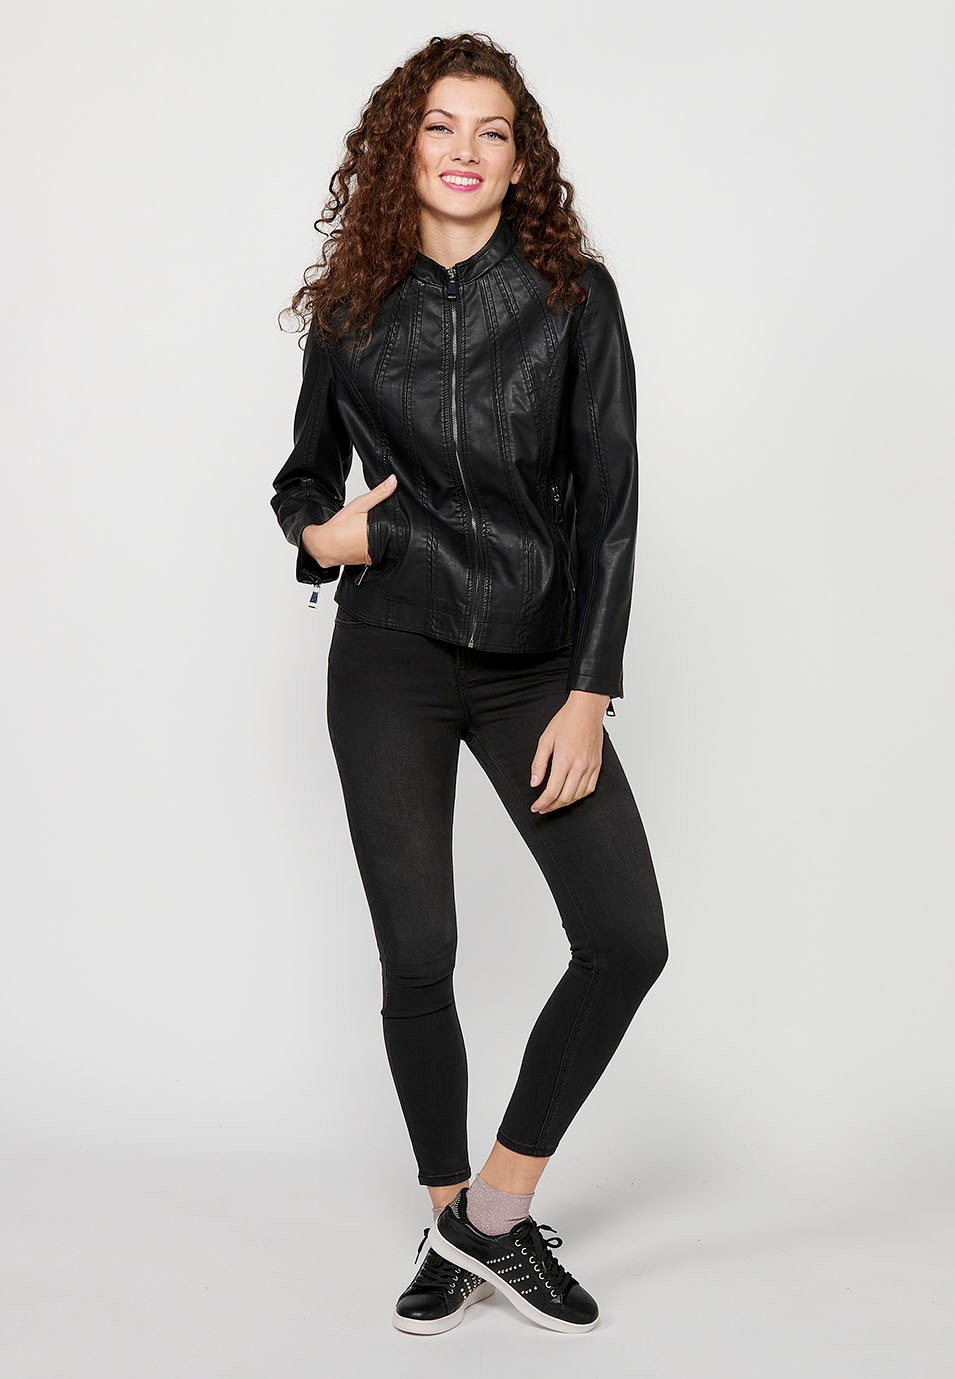 Long Sleeve Jacket with Round High Neck and Front Zipper Closure in Black for Women 6